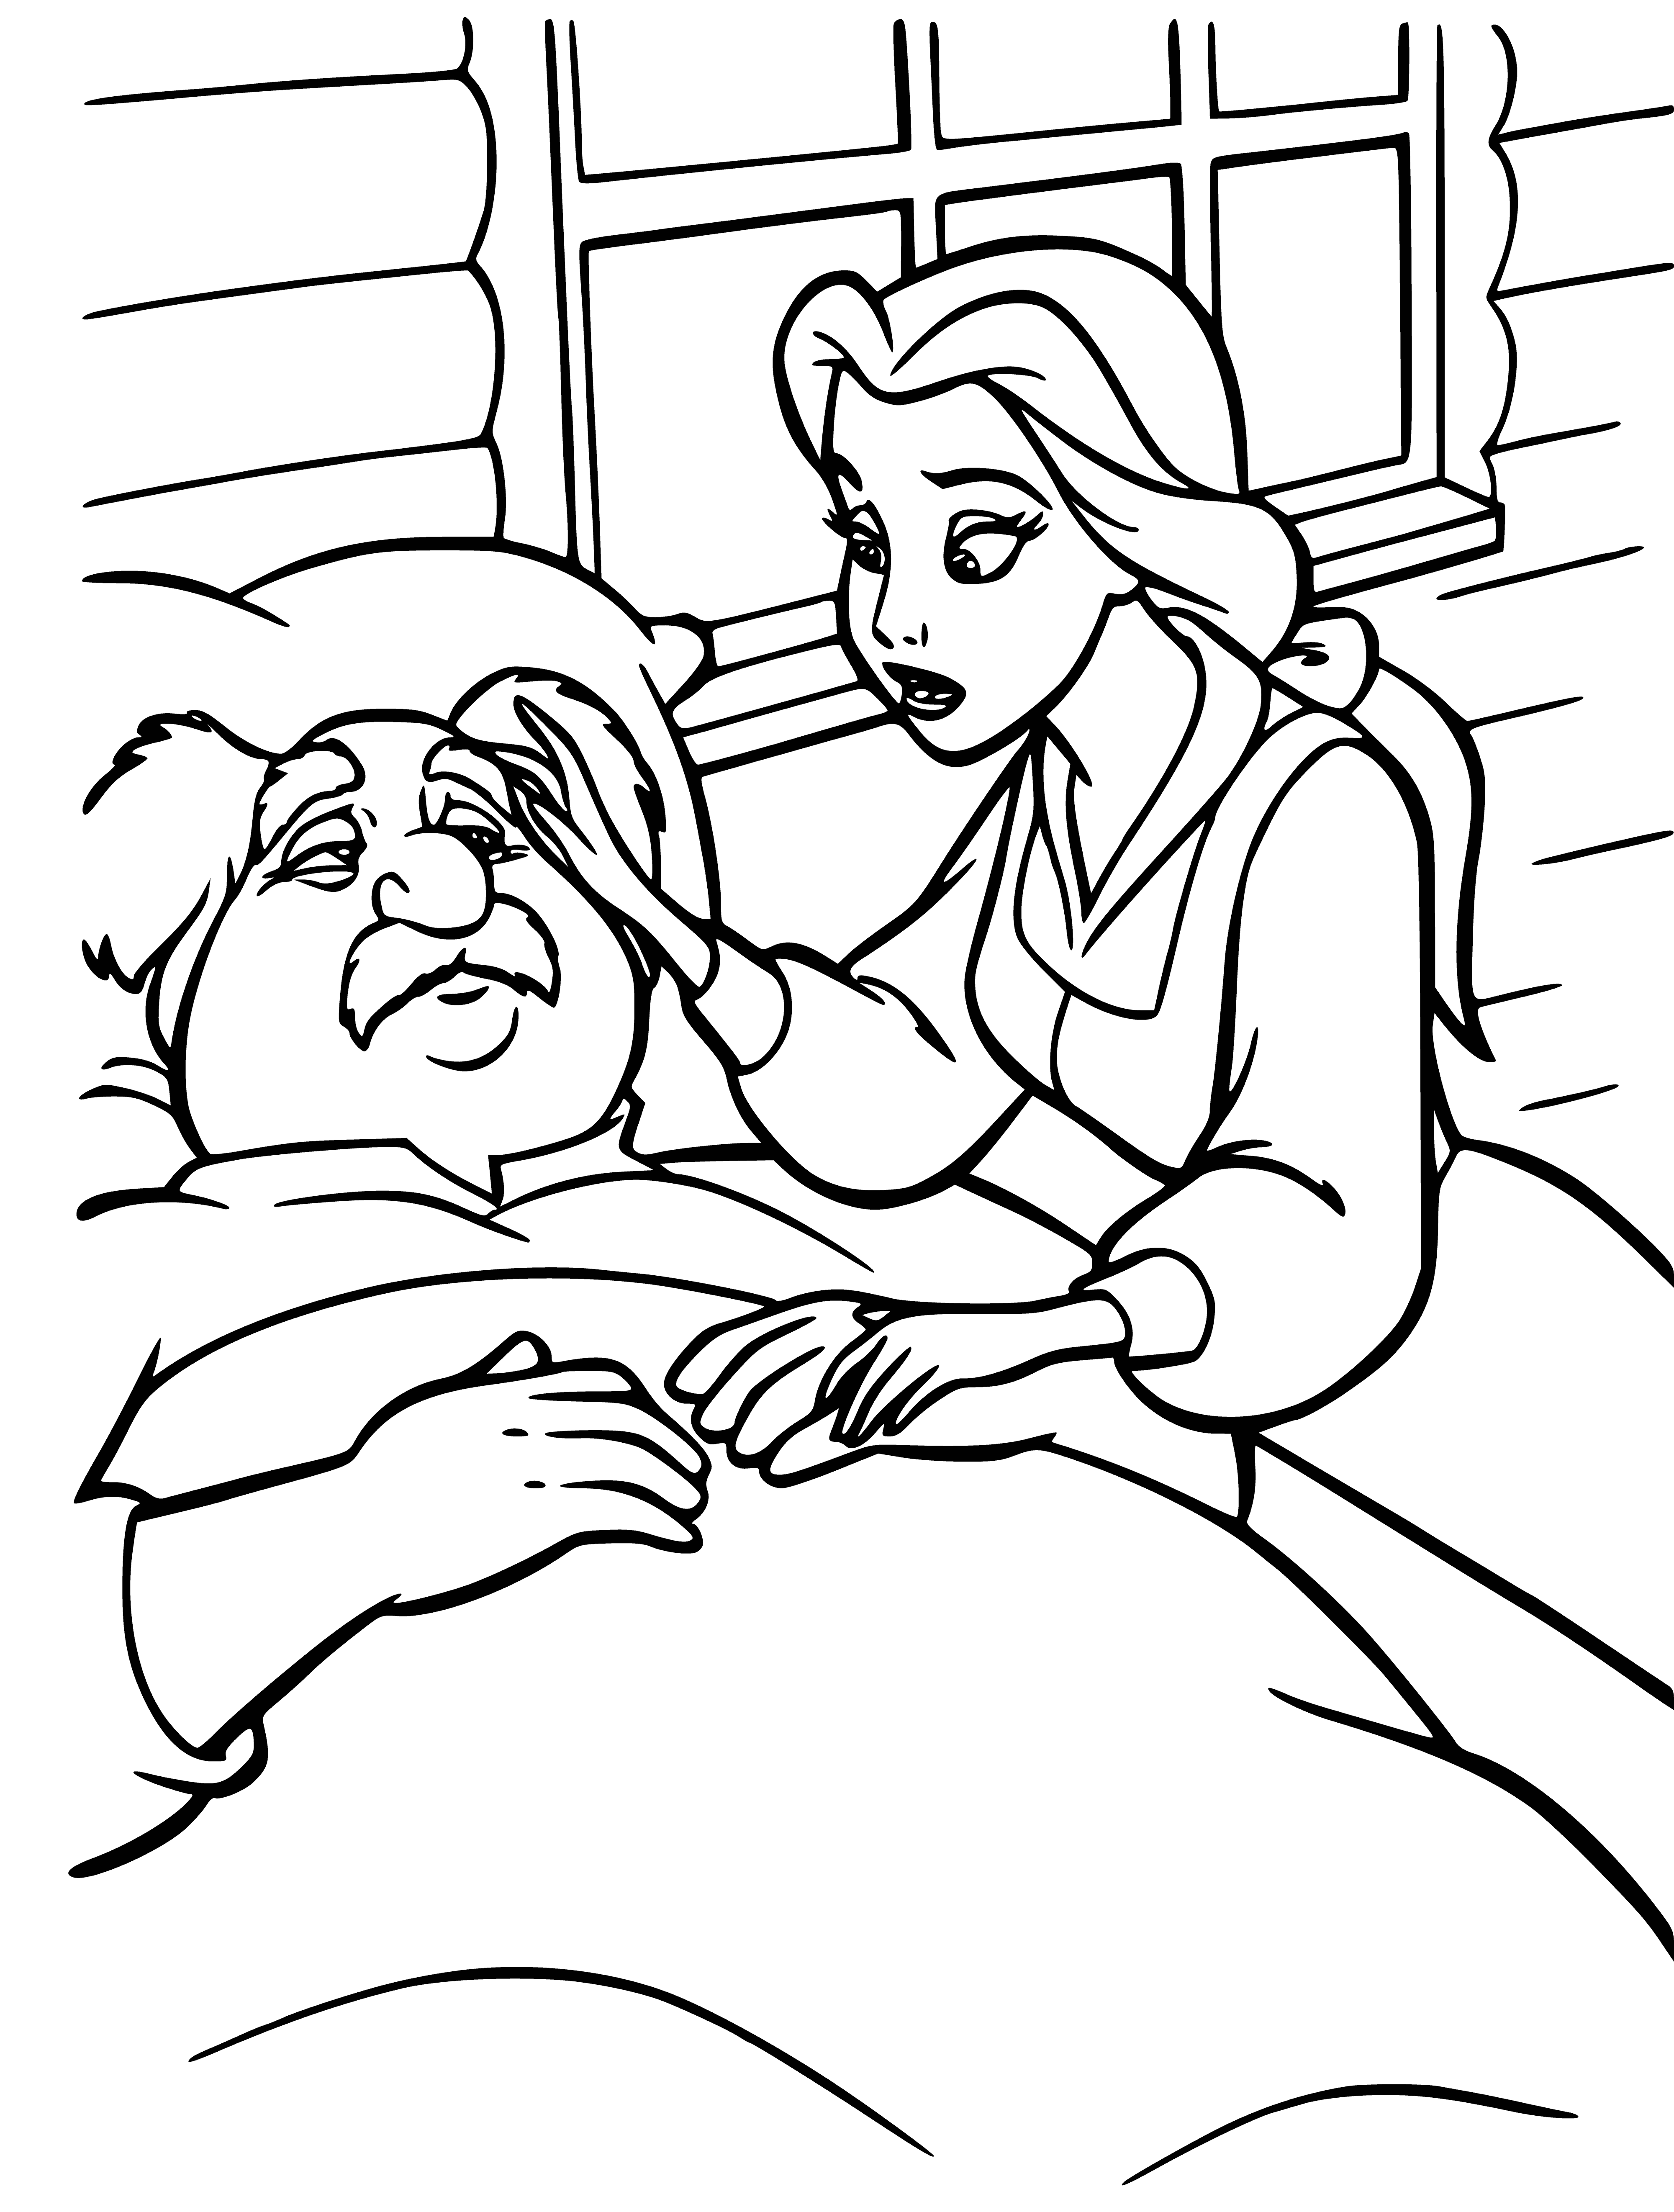 coloring page: Father and daughter sit at a table. Father has a beard, robe, and holds a book. Daughter with long hair wears a dress and looks at father with concern.